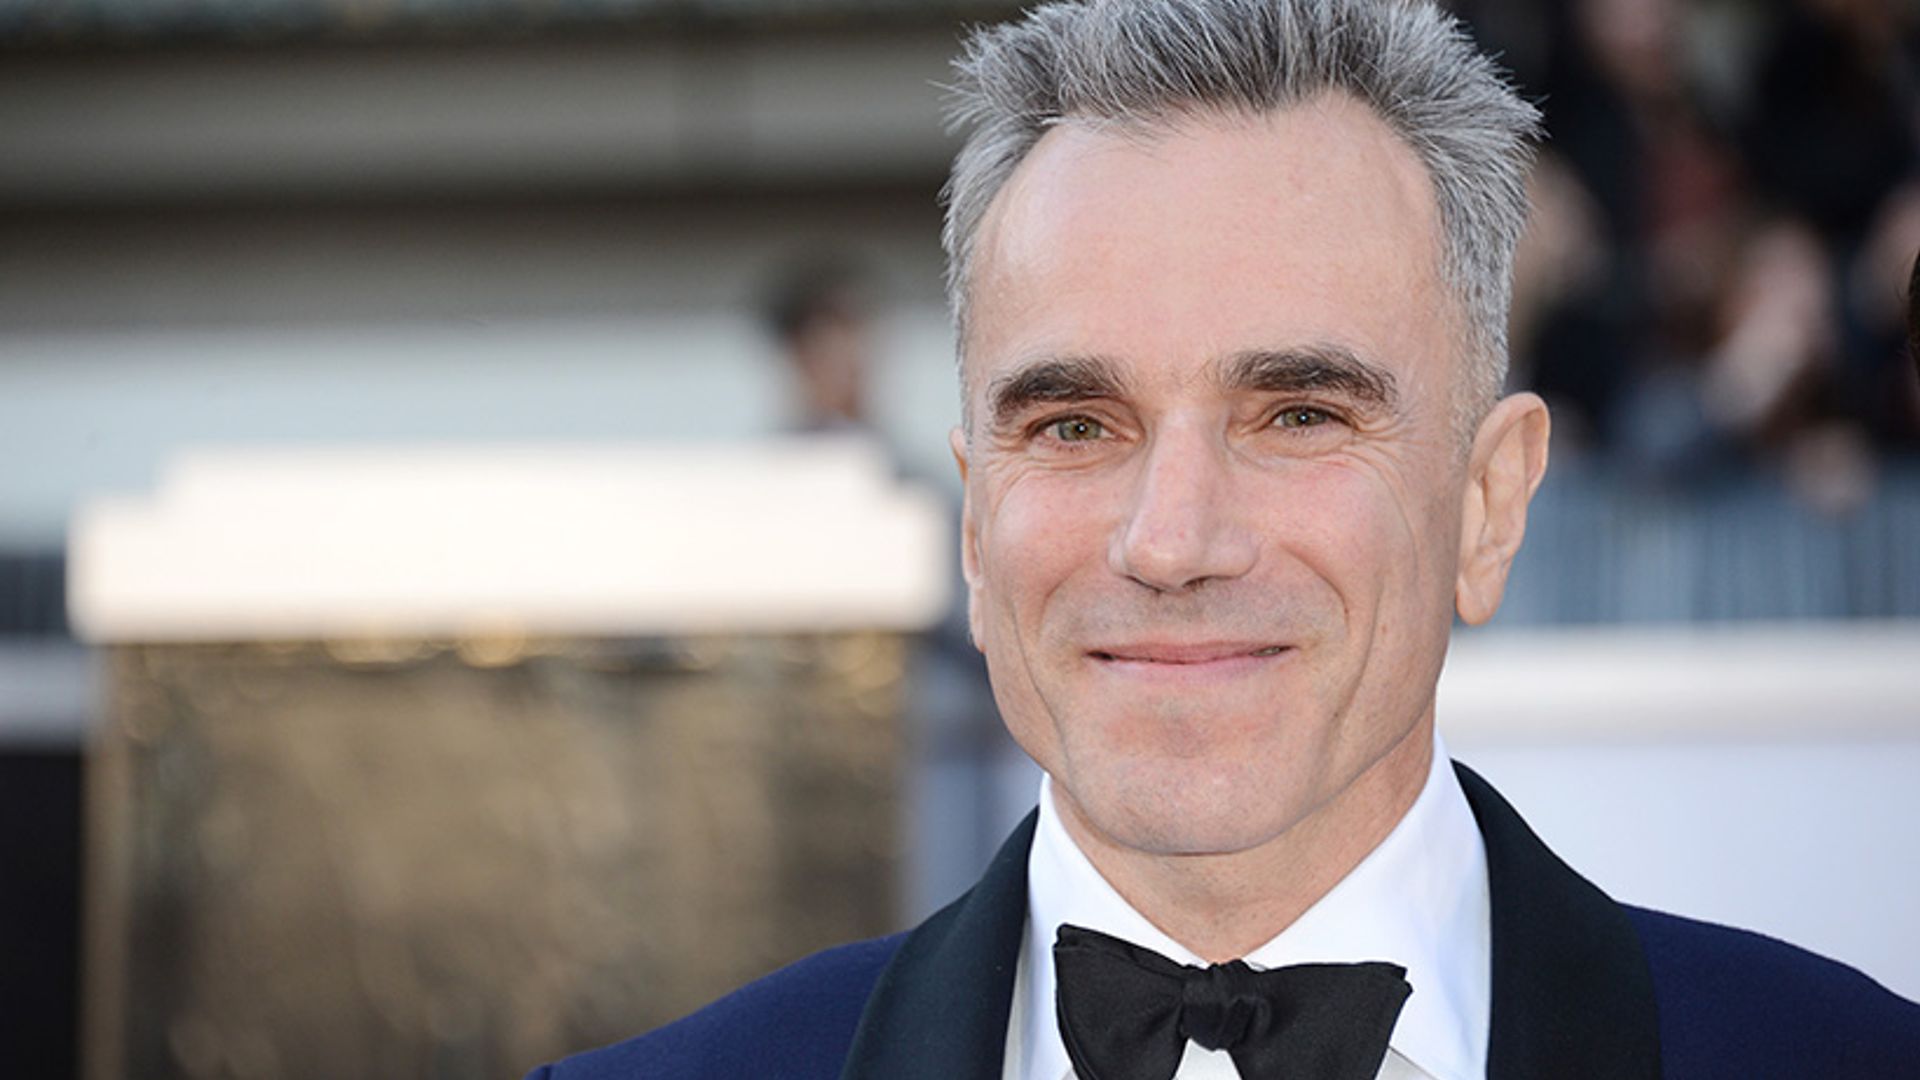 Daniel Day Lewis surprises fans with new appearance four years after